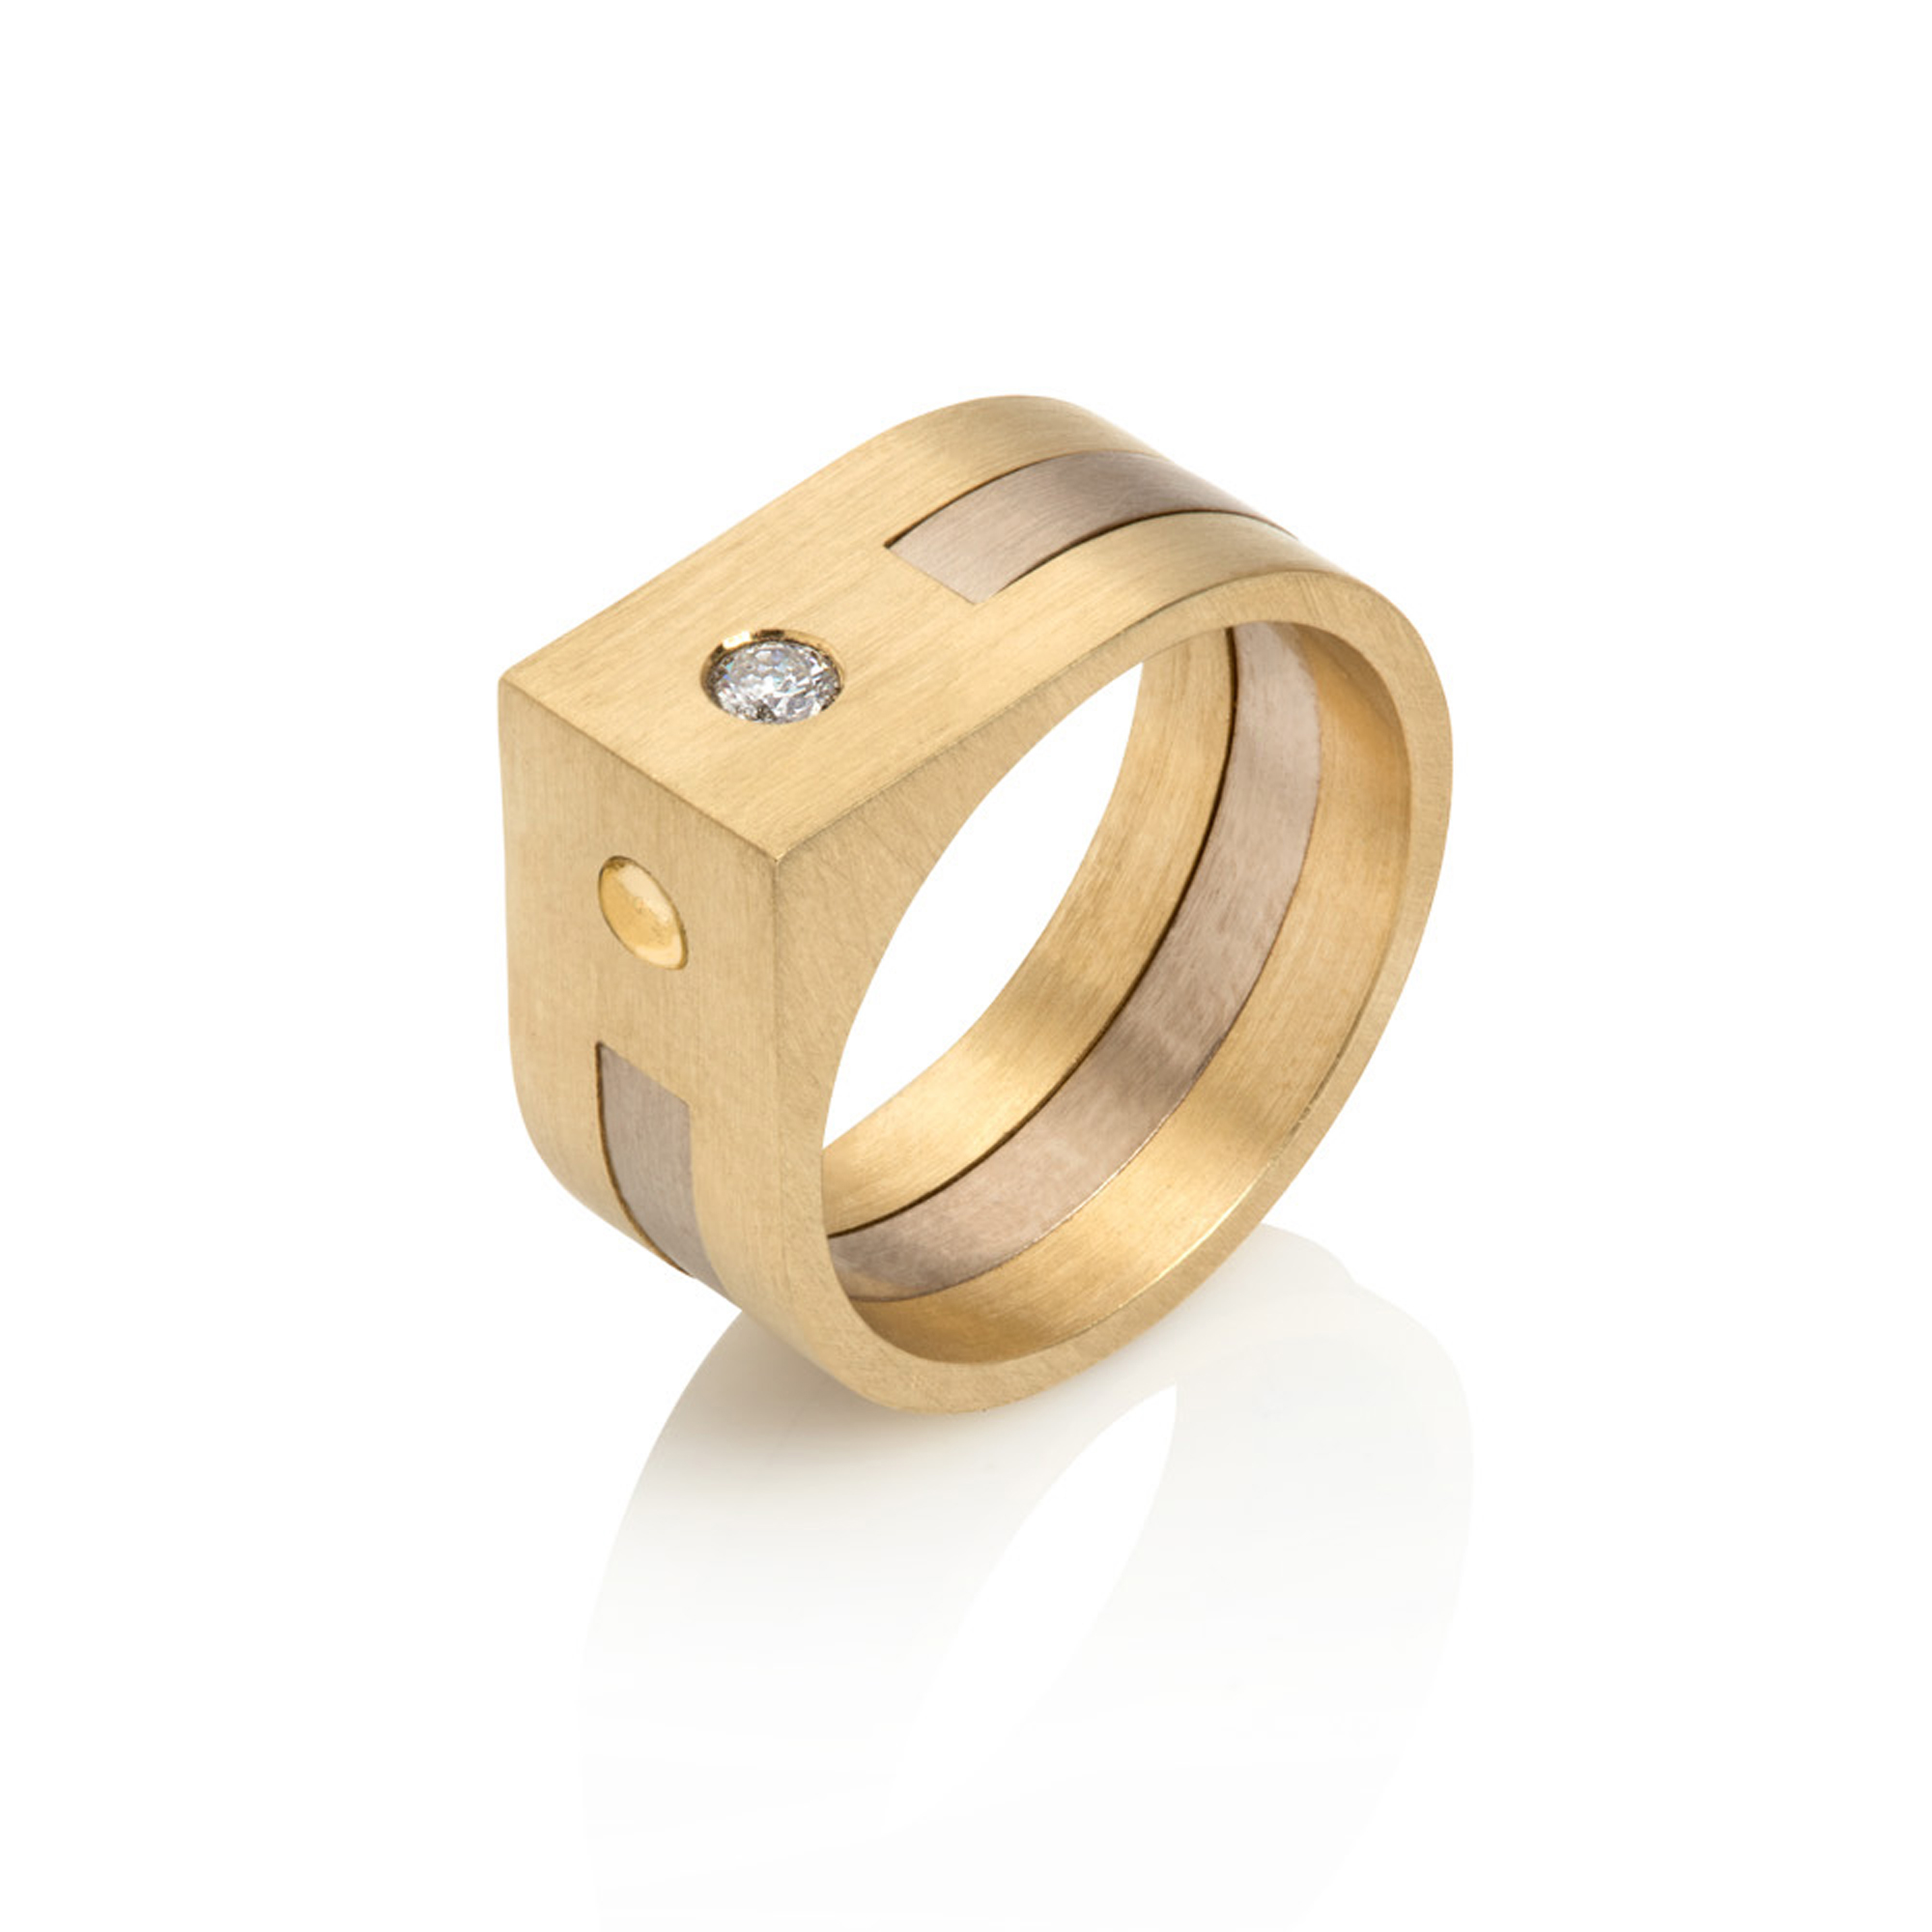 Wide ring of change - 18ct yellow gold with white gold insert - Oxx ...